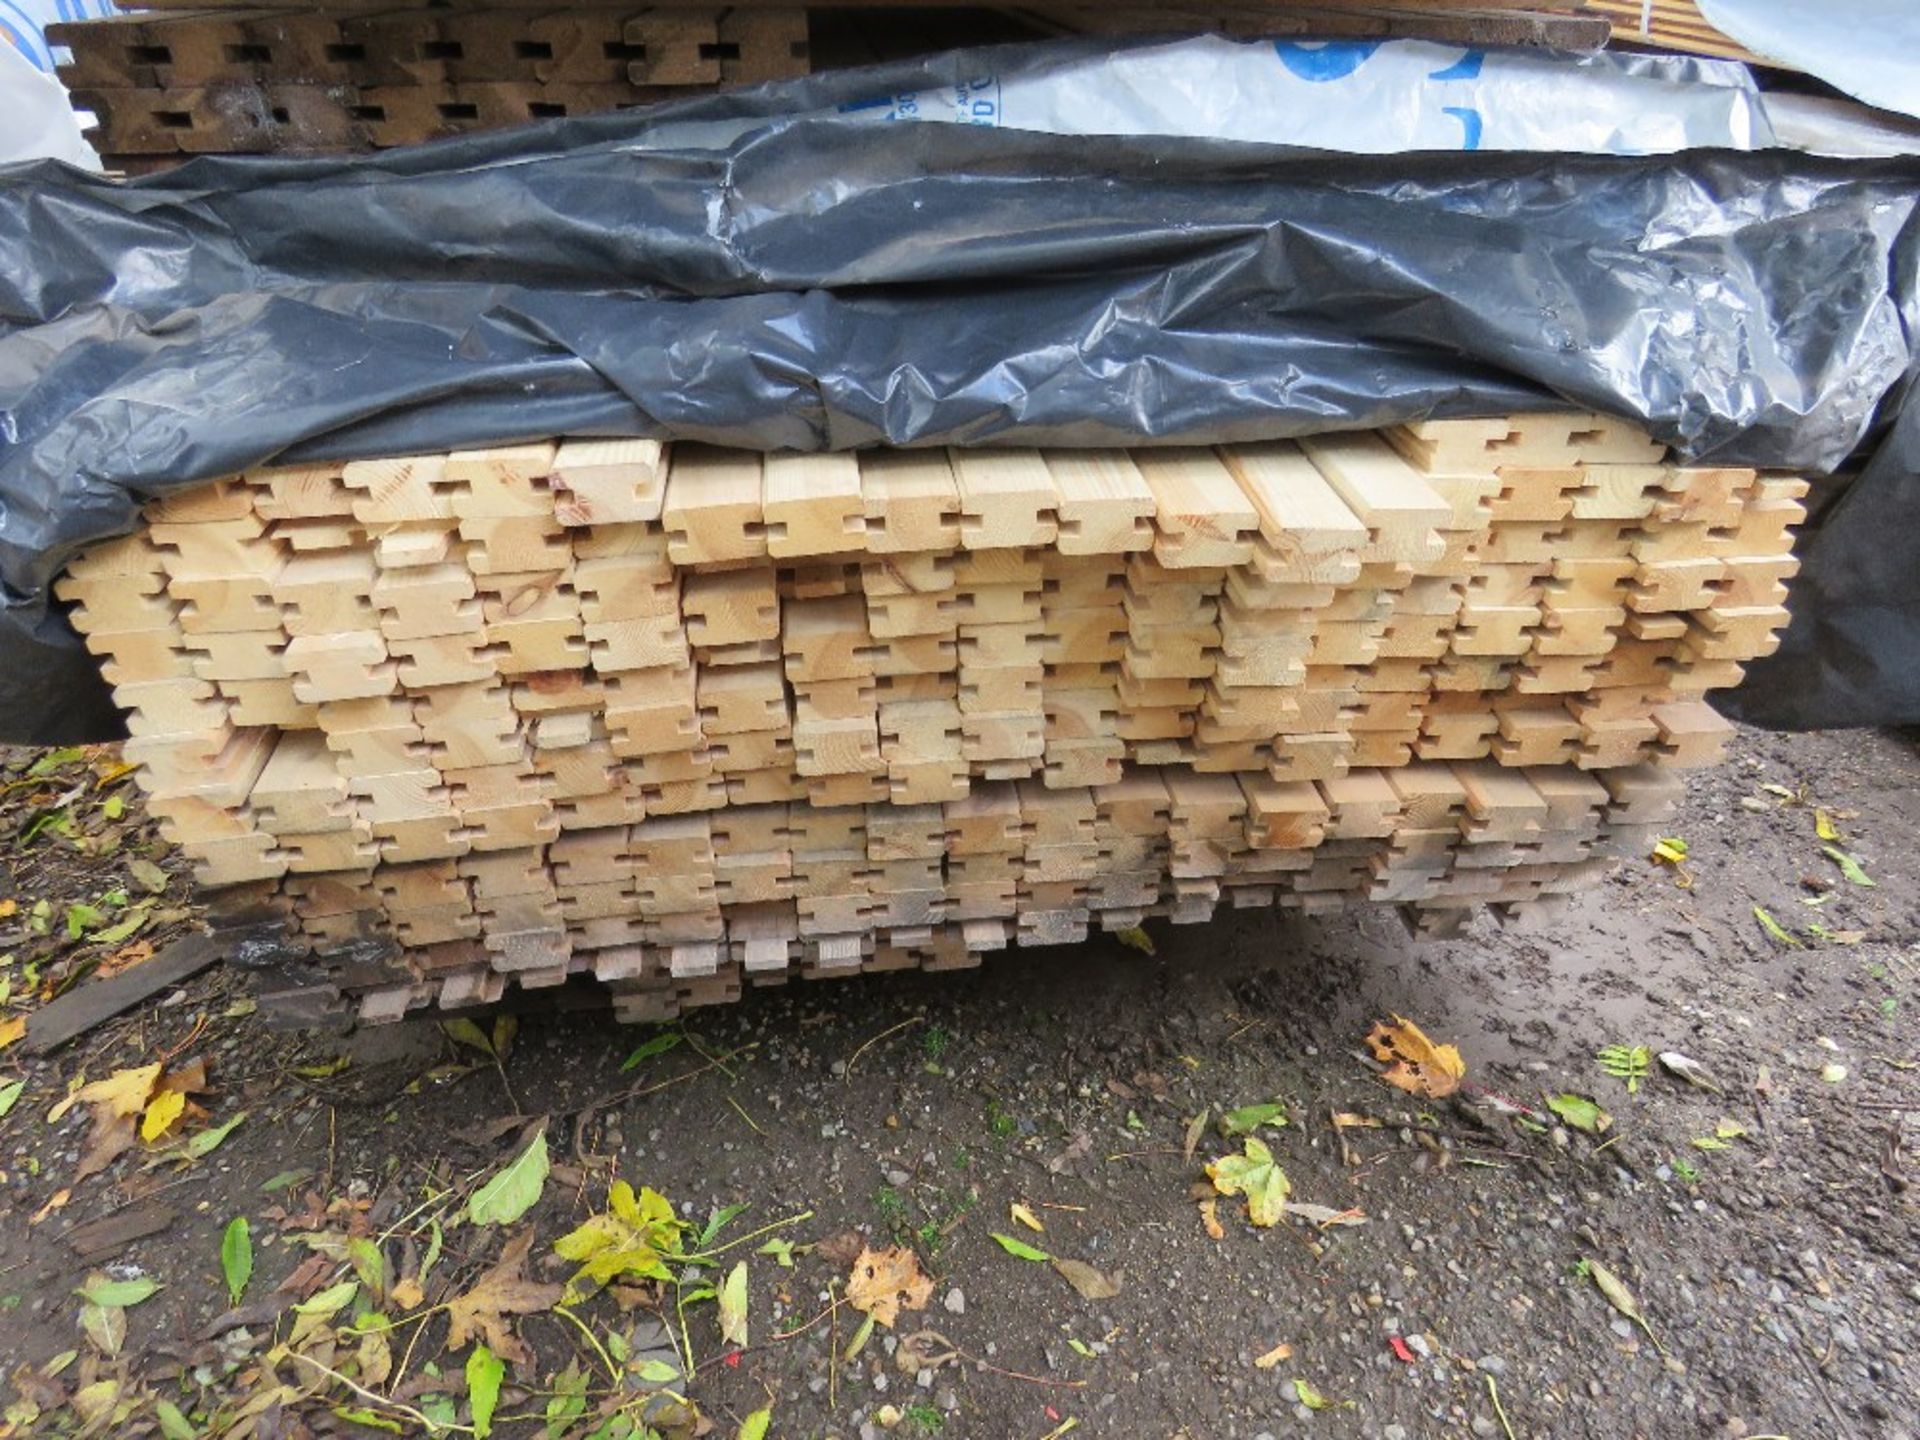 PACK OF H SECTIONED CONSTRUCTION TIMBER, UNTREATED. SIZE: 1.70M LENGTH X 55MM WIDE X 35MM DEPTH APPR